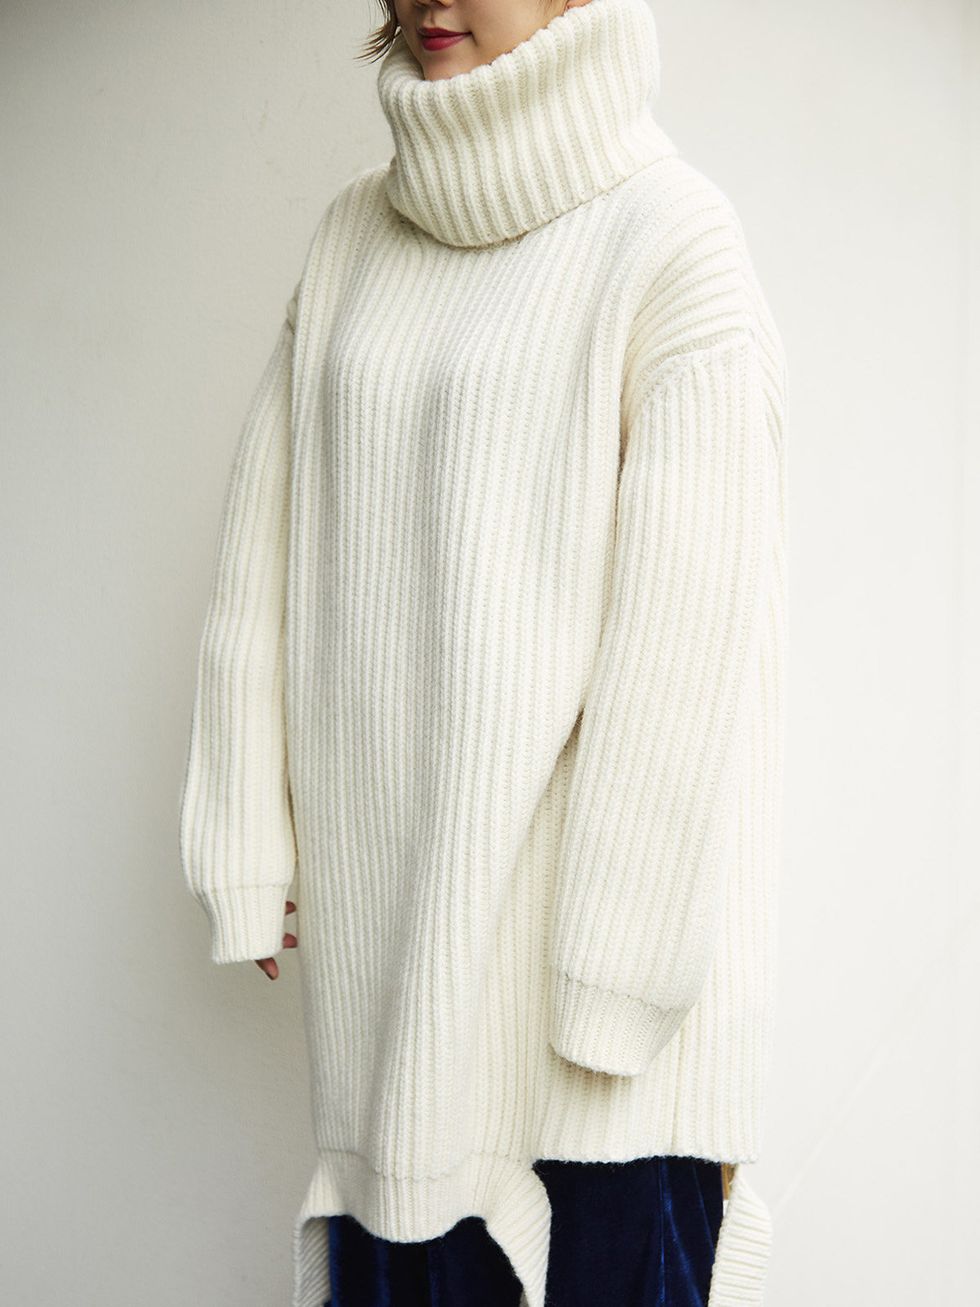 Clothing, White, Sweater, Outerwear, Shoulder, Neck, Sleeve, Wool, Fashion, Joint, 